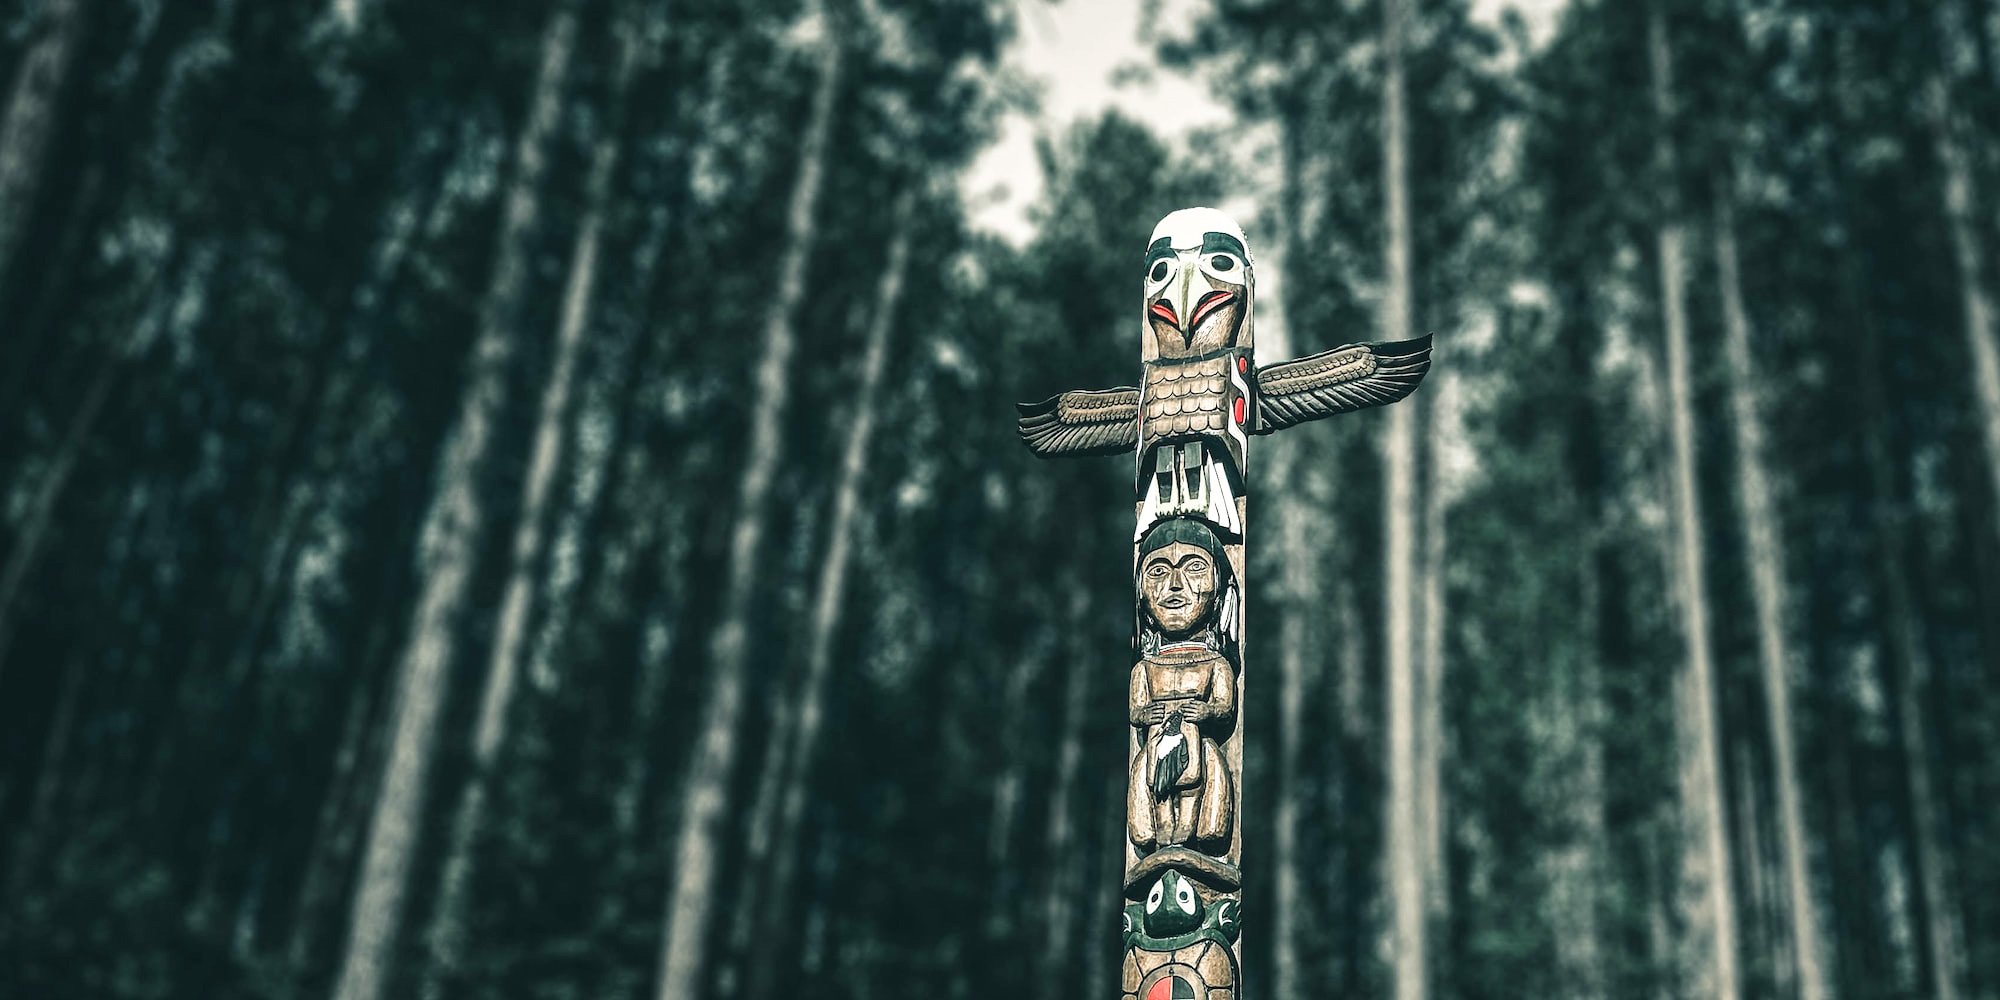 totem in Algonquin Park, ON, Canada